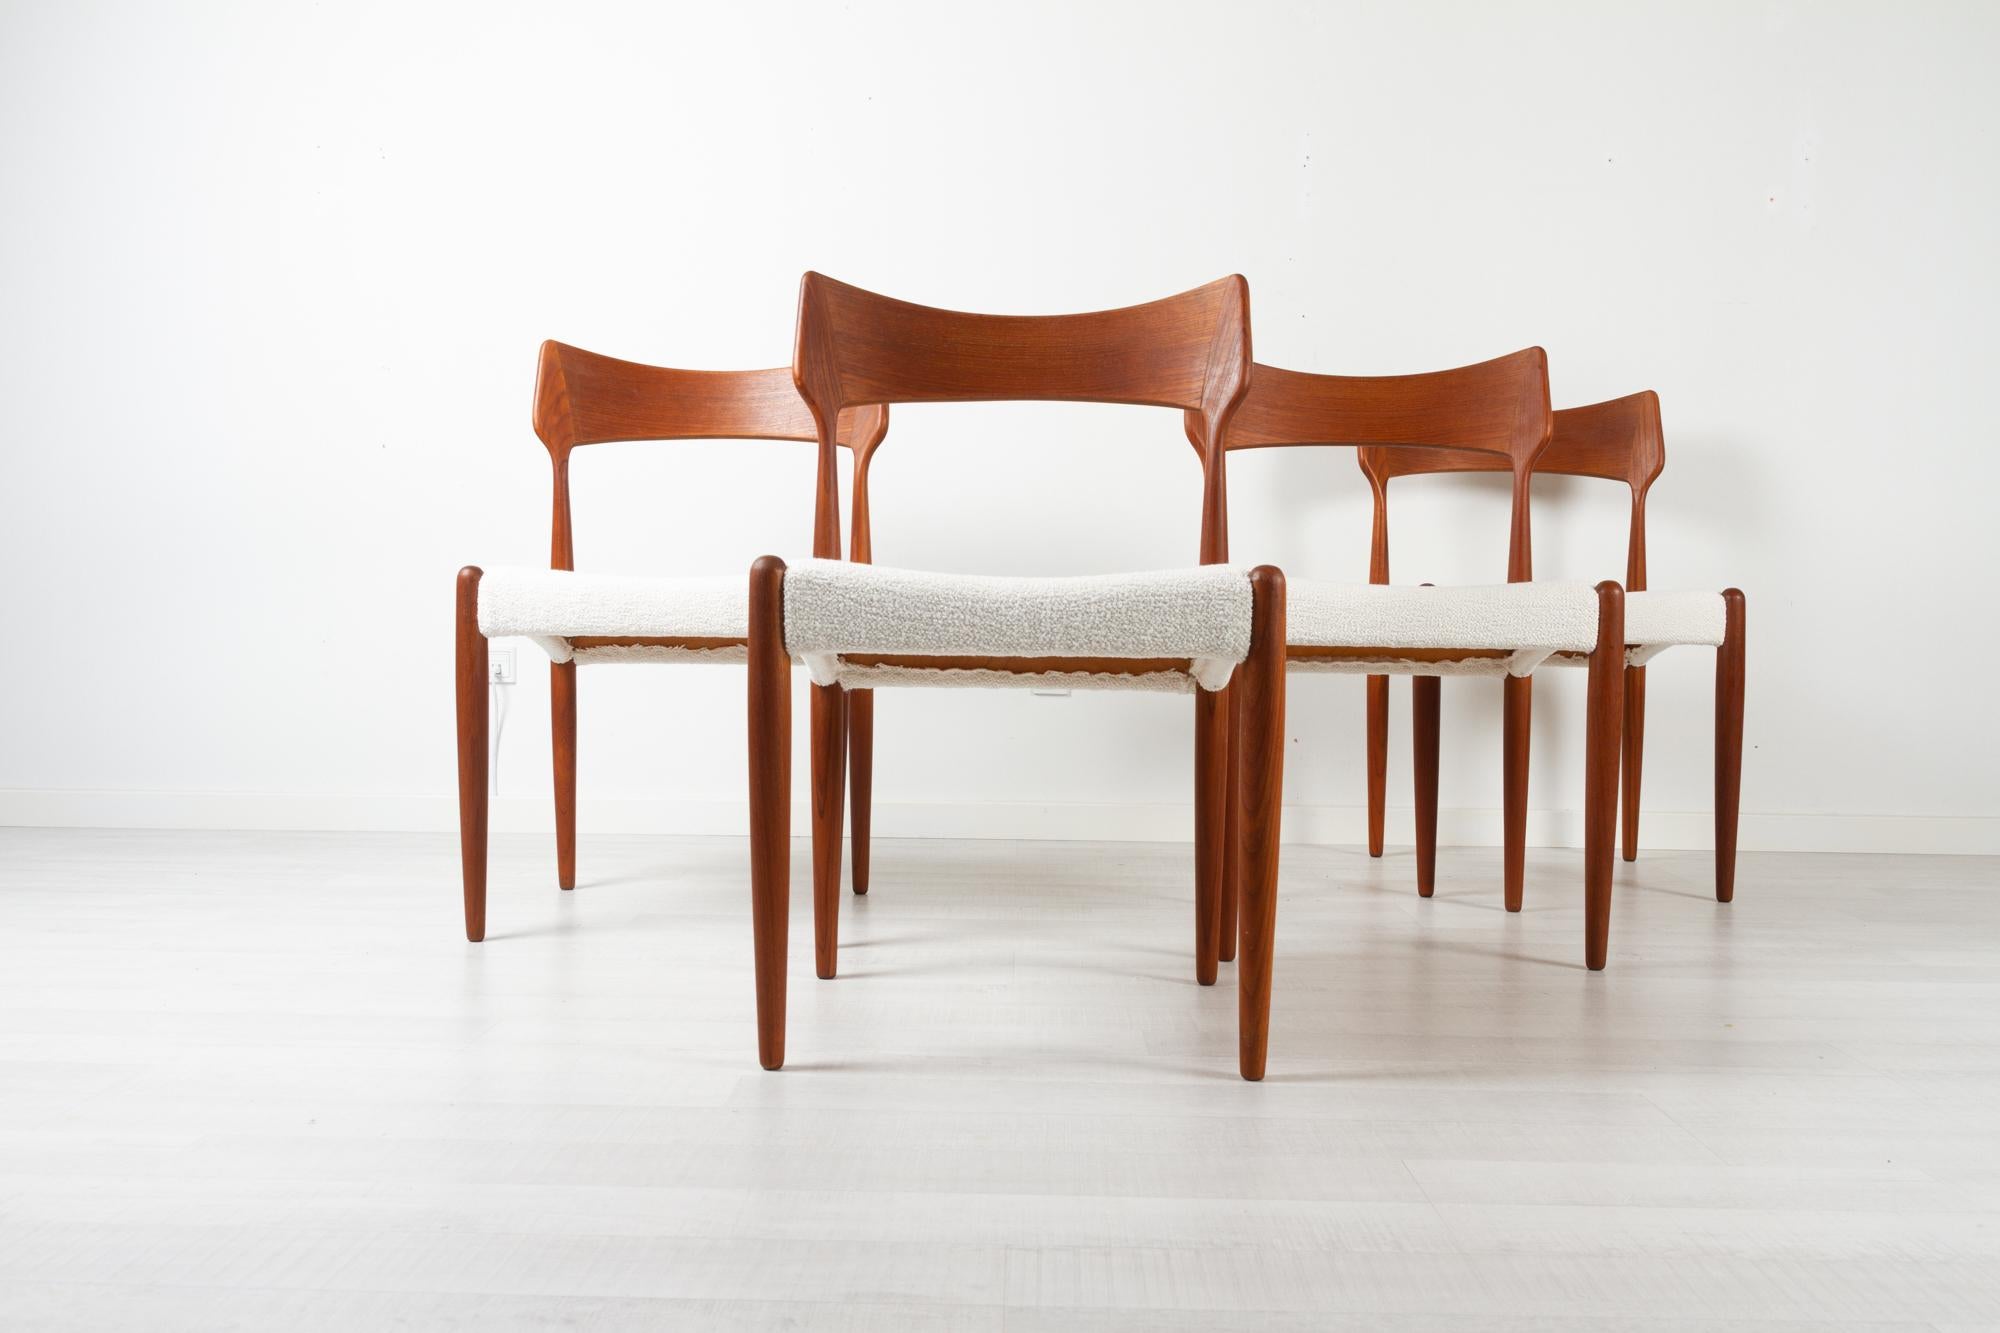 Vintage Danish teak dining chairs by Bernhard Pedersen & Søn, Denmark 1960s, Set of 4
Danish Mid-Century Modern dining chairs model 142 in solid teak designed by Christian Linneberg. Reupholstered with Scandinavian quality bouclé in off